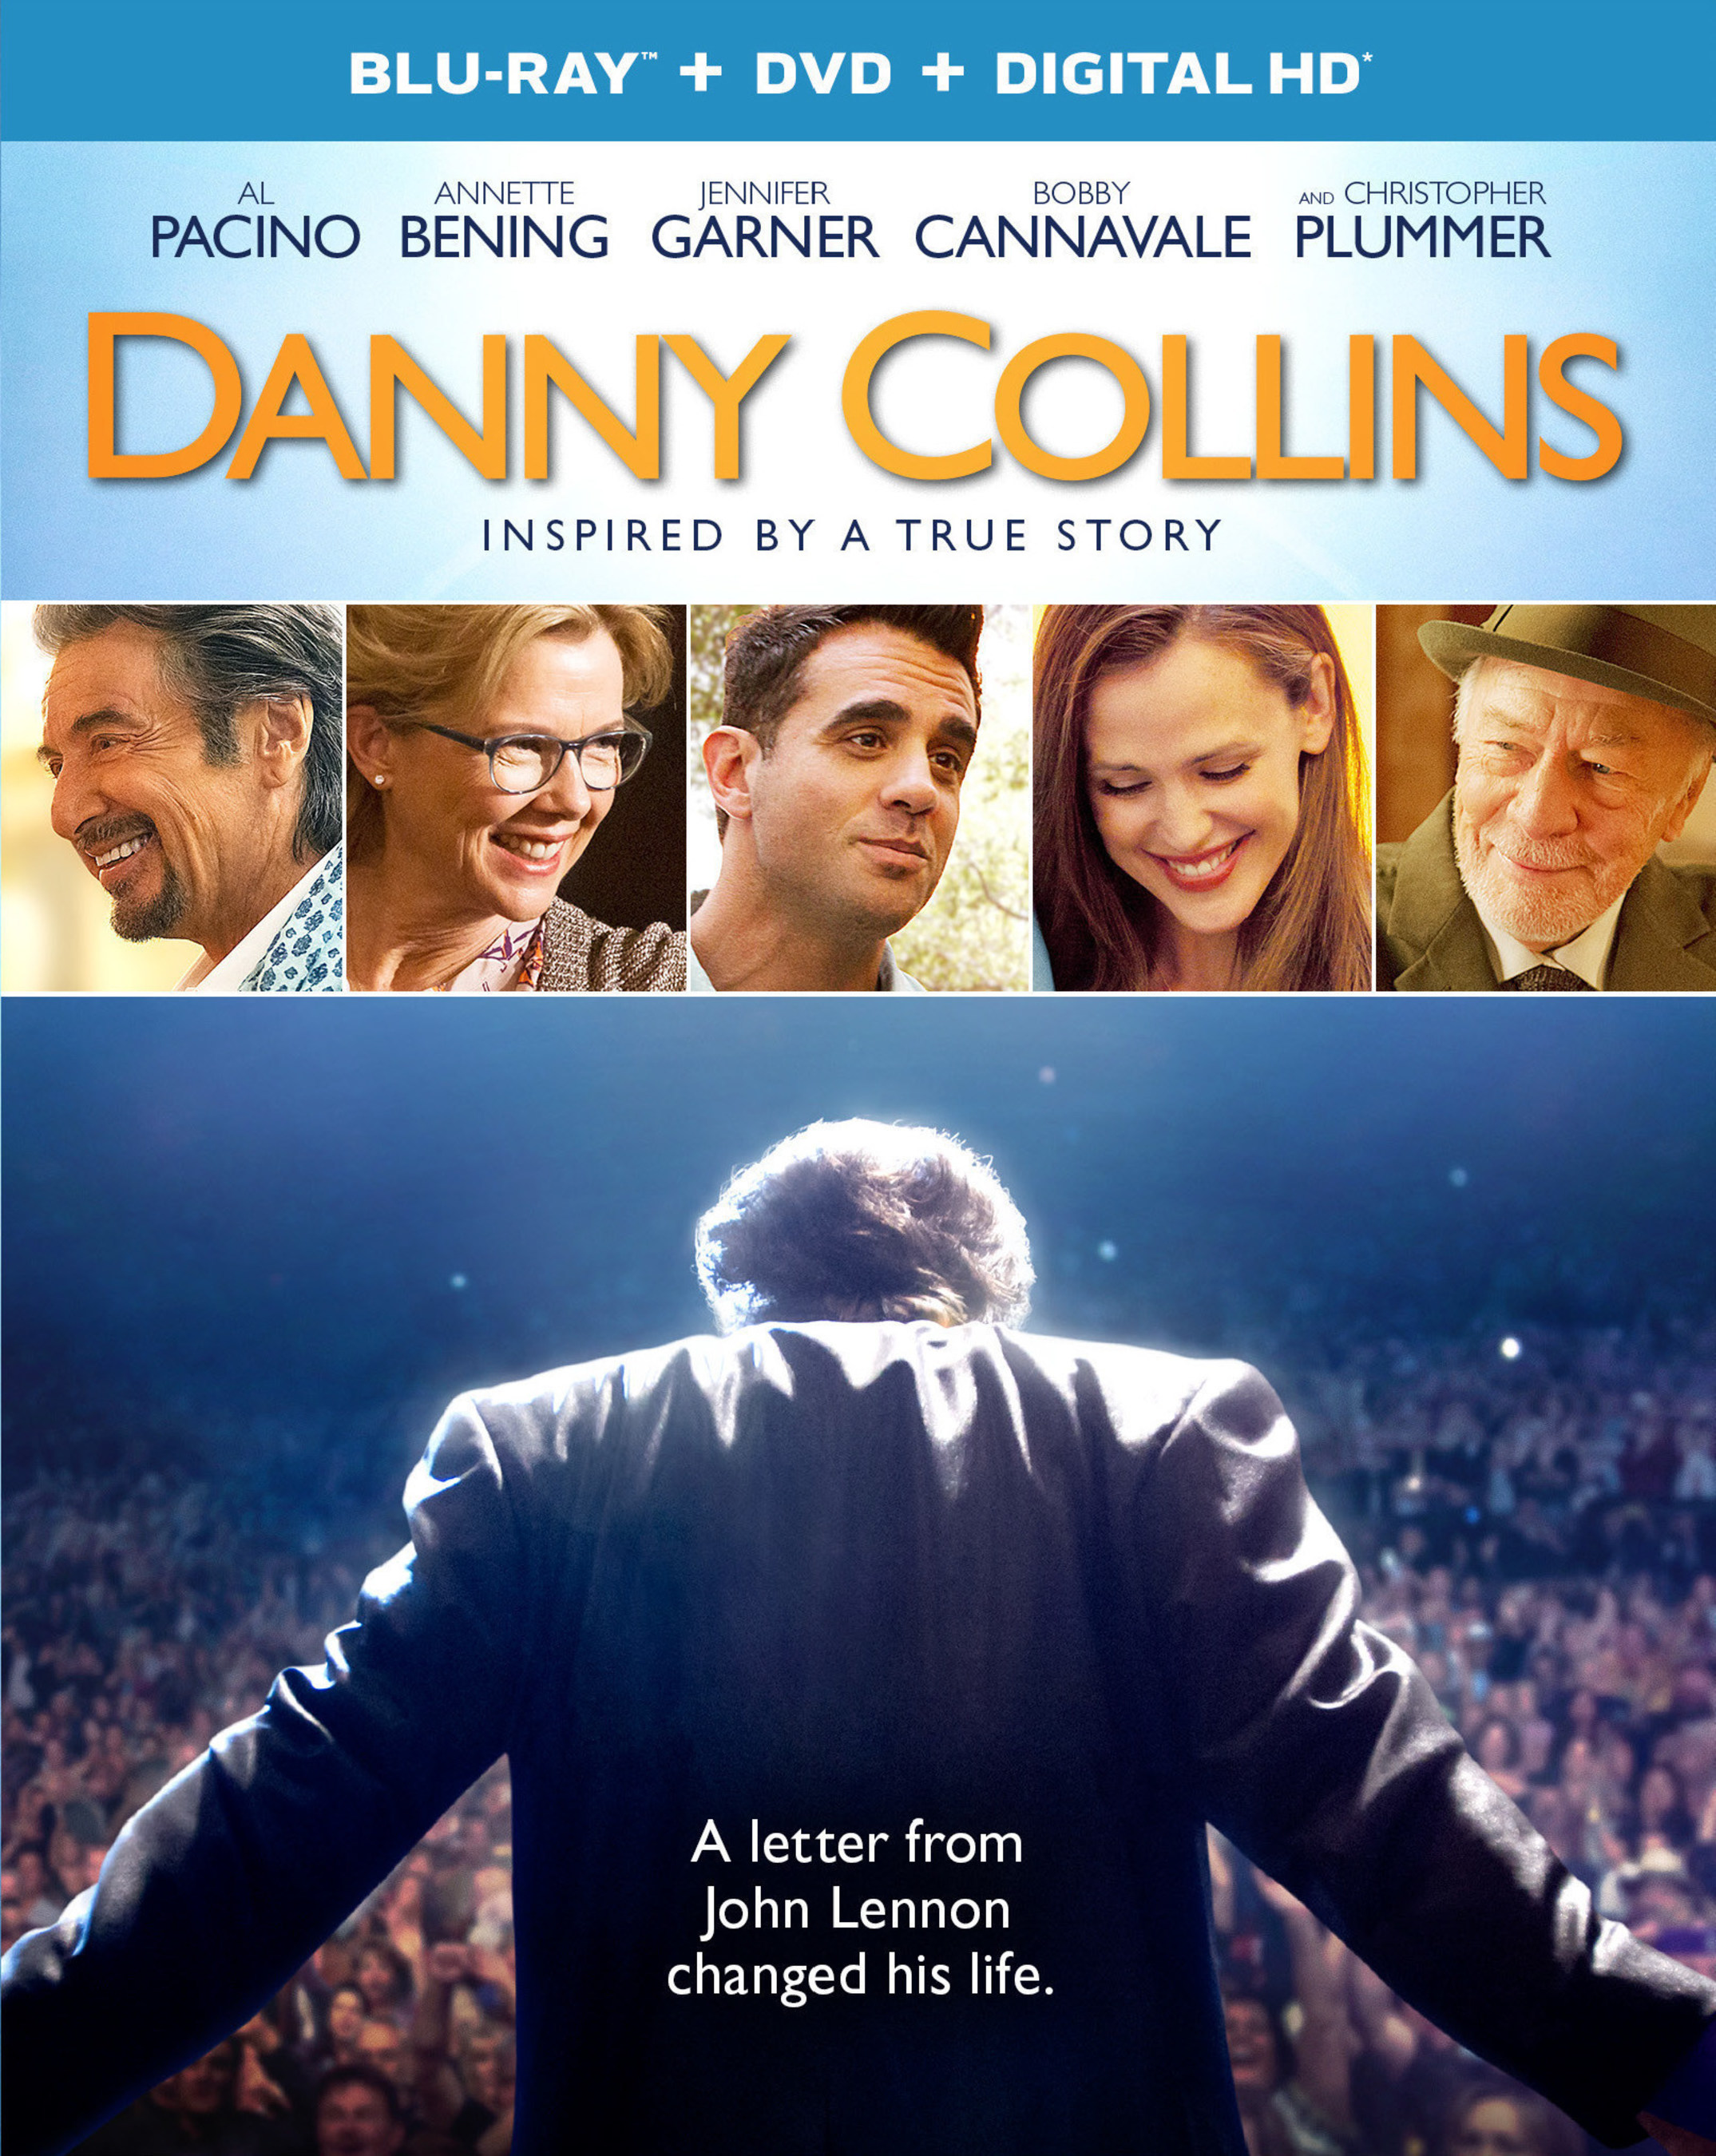 DANNY COLLINS IS AVAILABLE ON BLU-RAY AND DVD JUNE 30TH FROM UNIVERSAL PICTURES HOME ENTERTAINMENT.